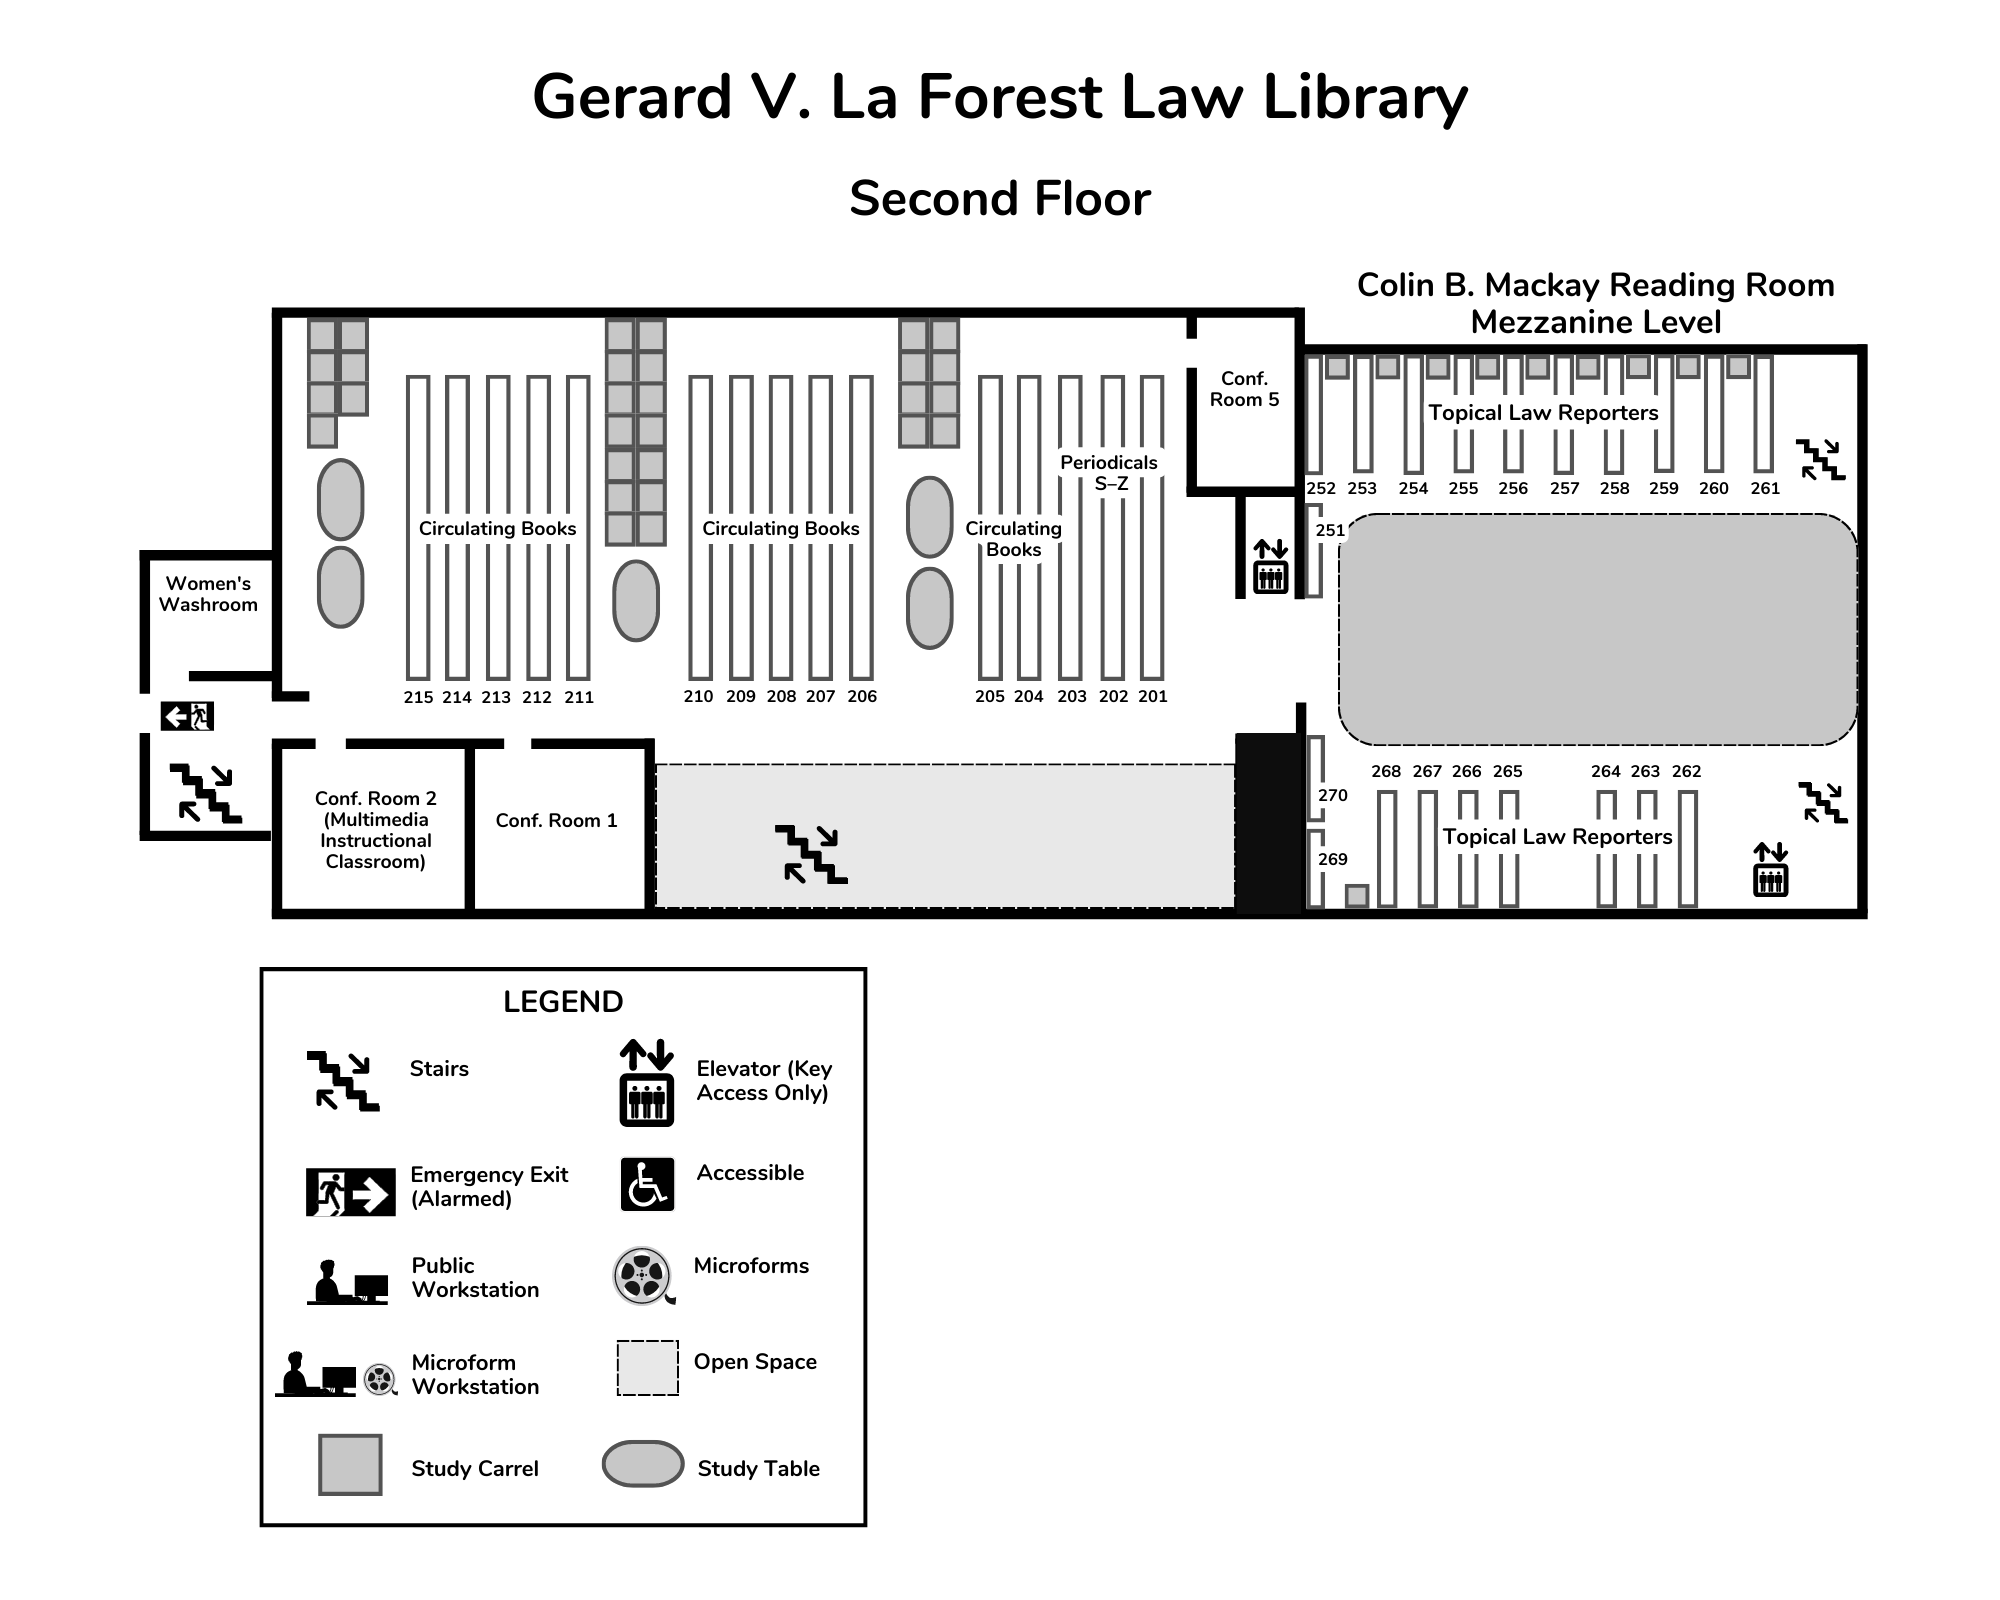 Law Library, Floor 2